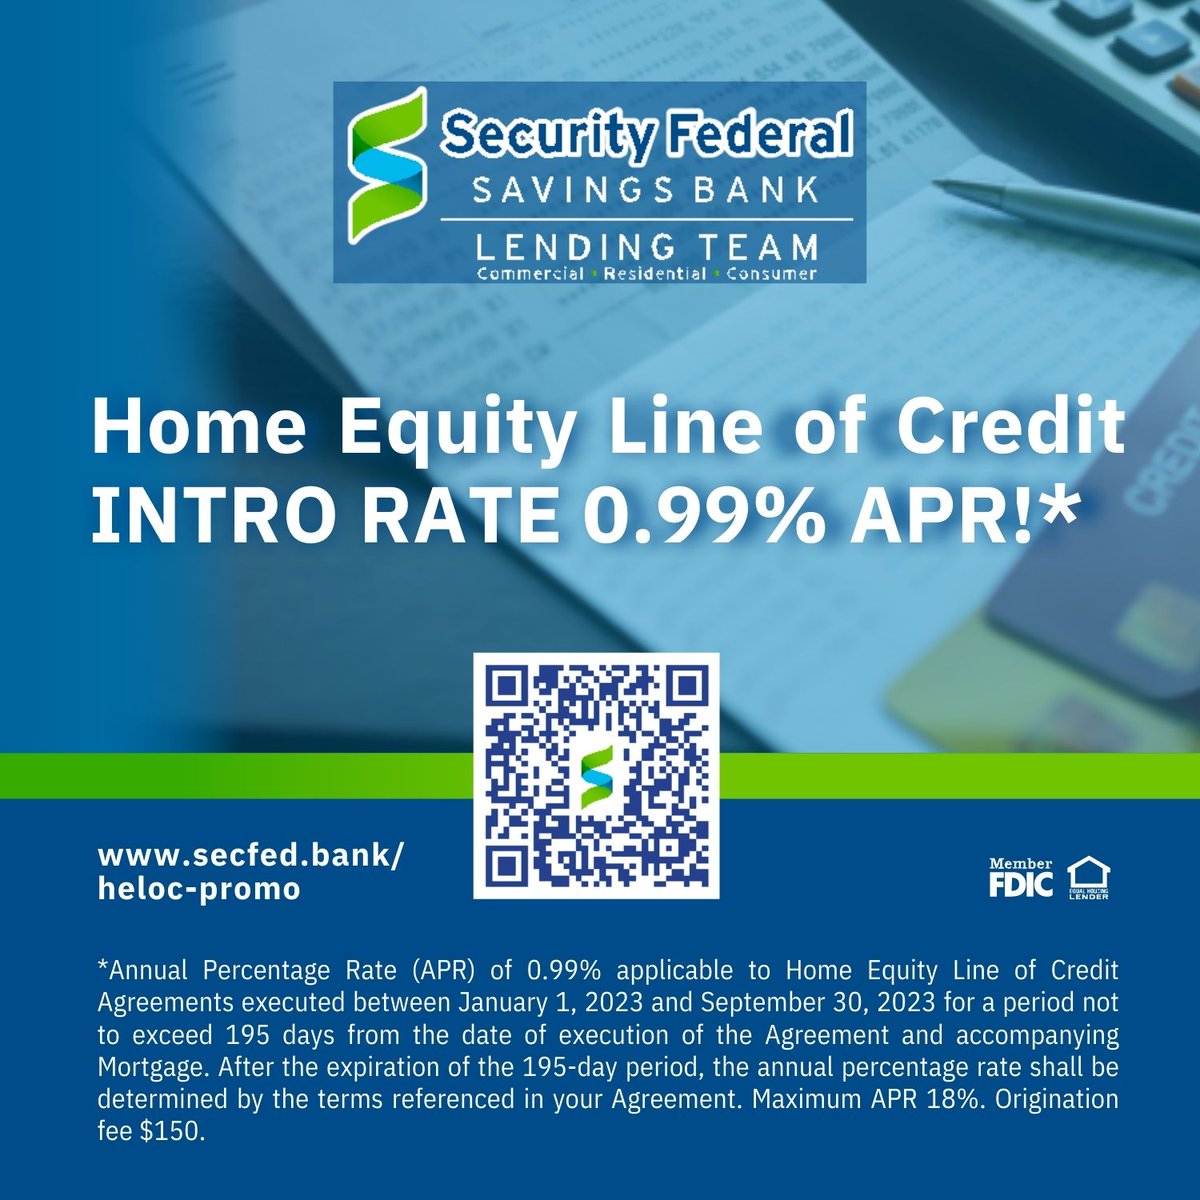 Home Improvements ✅
Pay off High Interest Rate Credit Cards ✅
🗝️
Unlock a 🌎 of endless possibilities with a SecFed Home Equity Line of Credit.
Take advantage of a great introductory rate of only 0.99% APR!*
secfed.bank/heloc-promo
 #homeequity#lineofcredit#endlesspossibilities